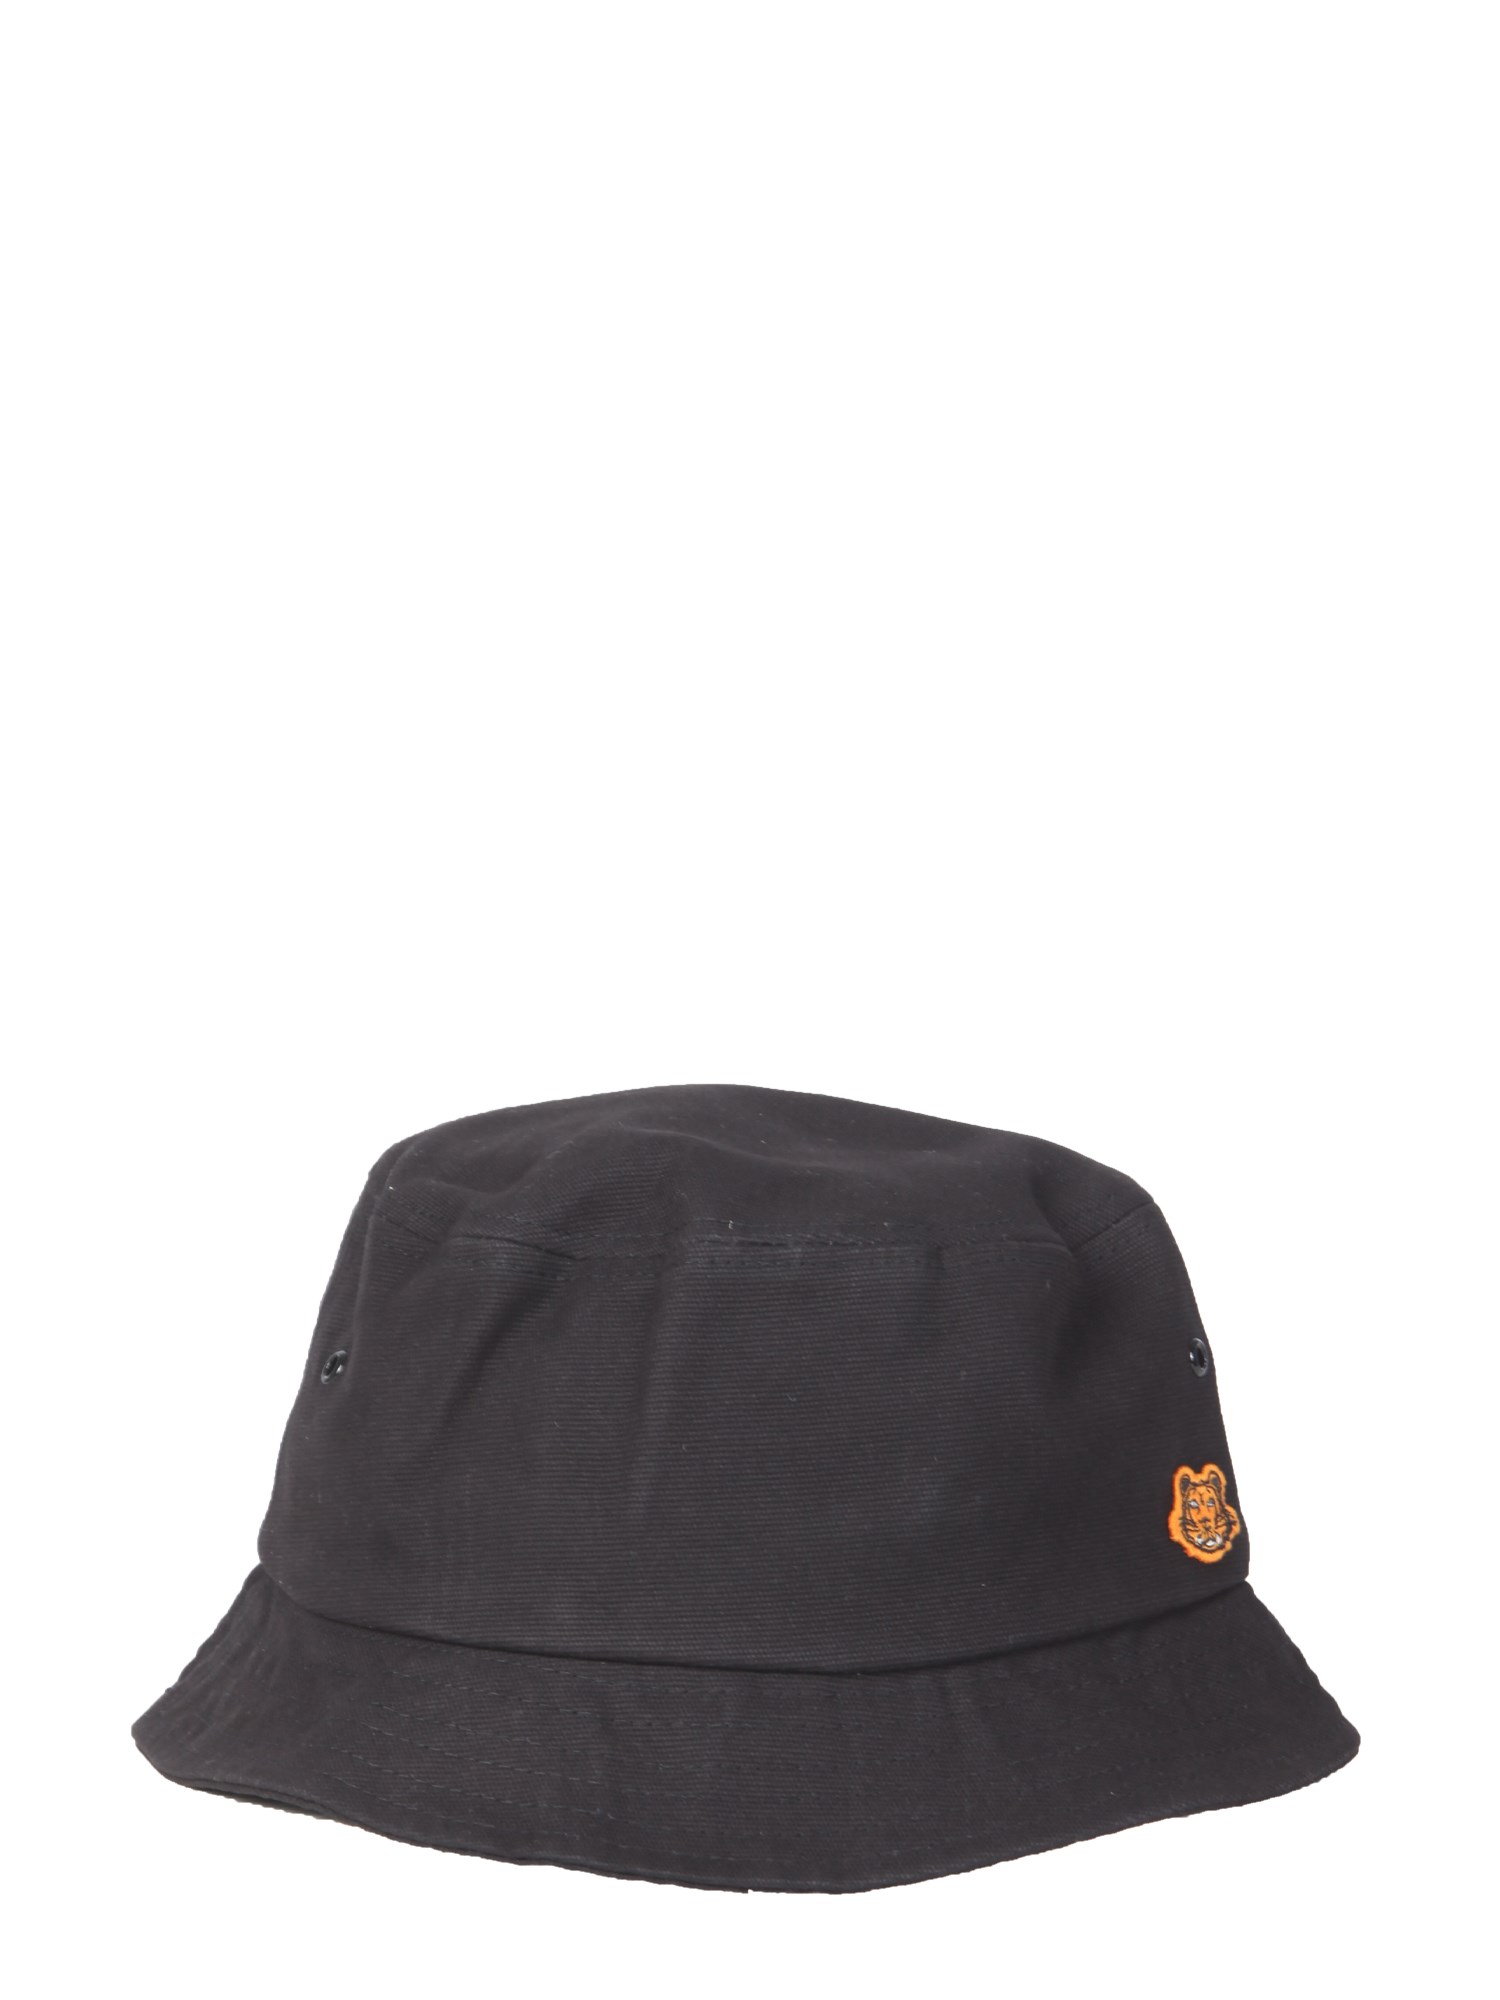 kenzo bucket hat with tiger crest